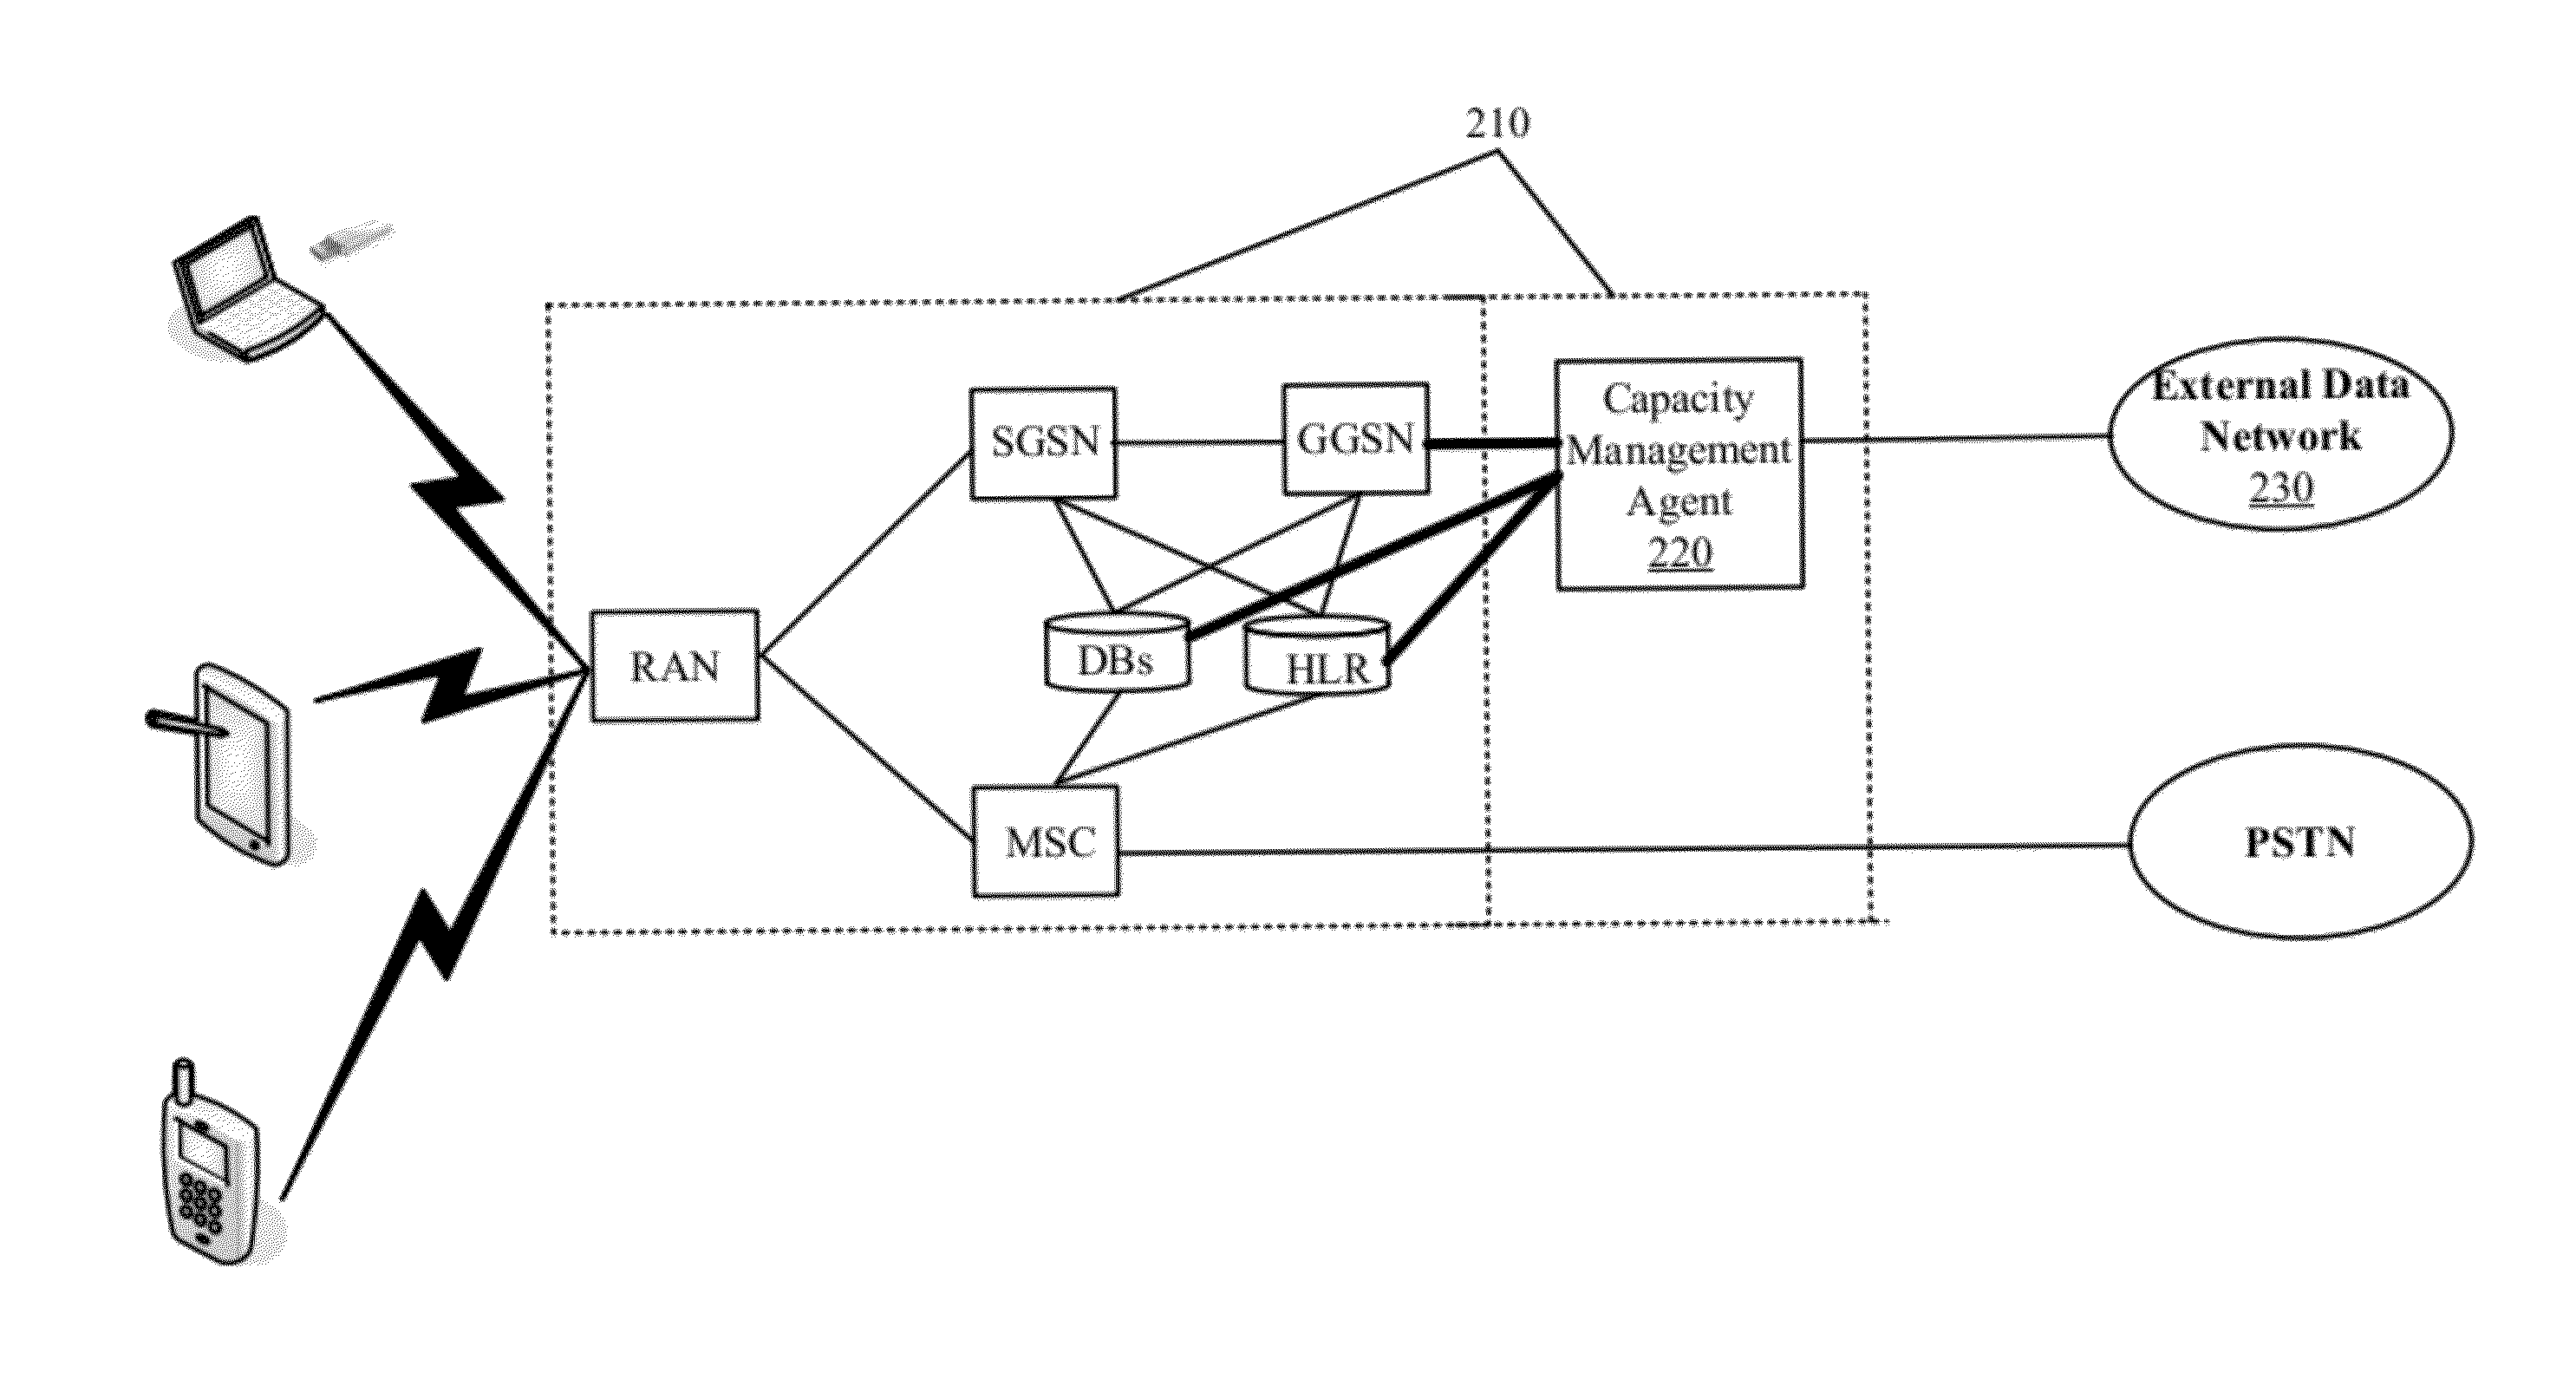 Request modification for transparent capacity management in a carrier network